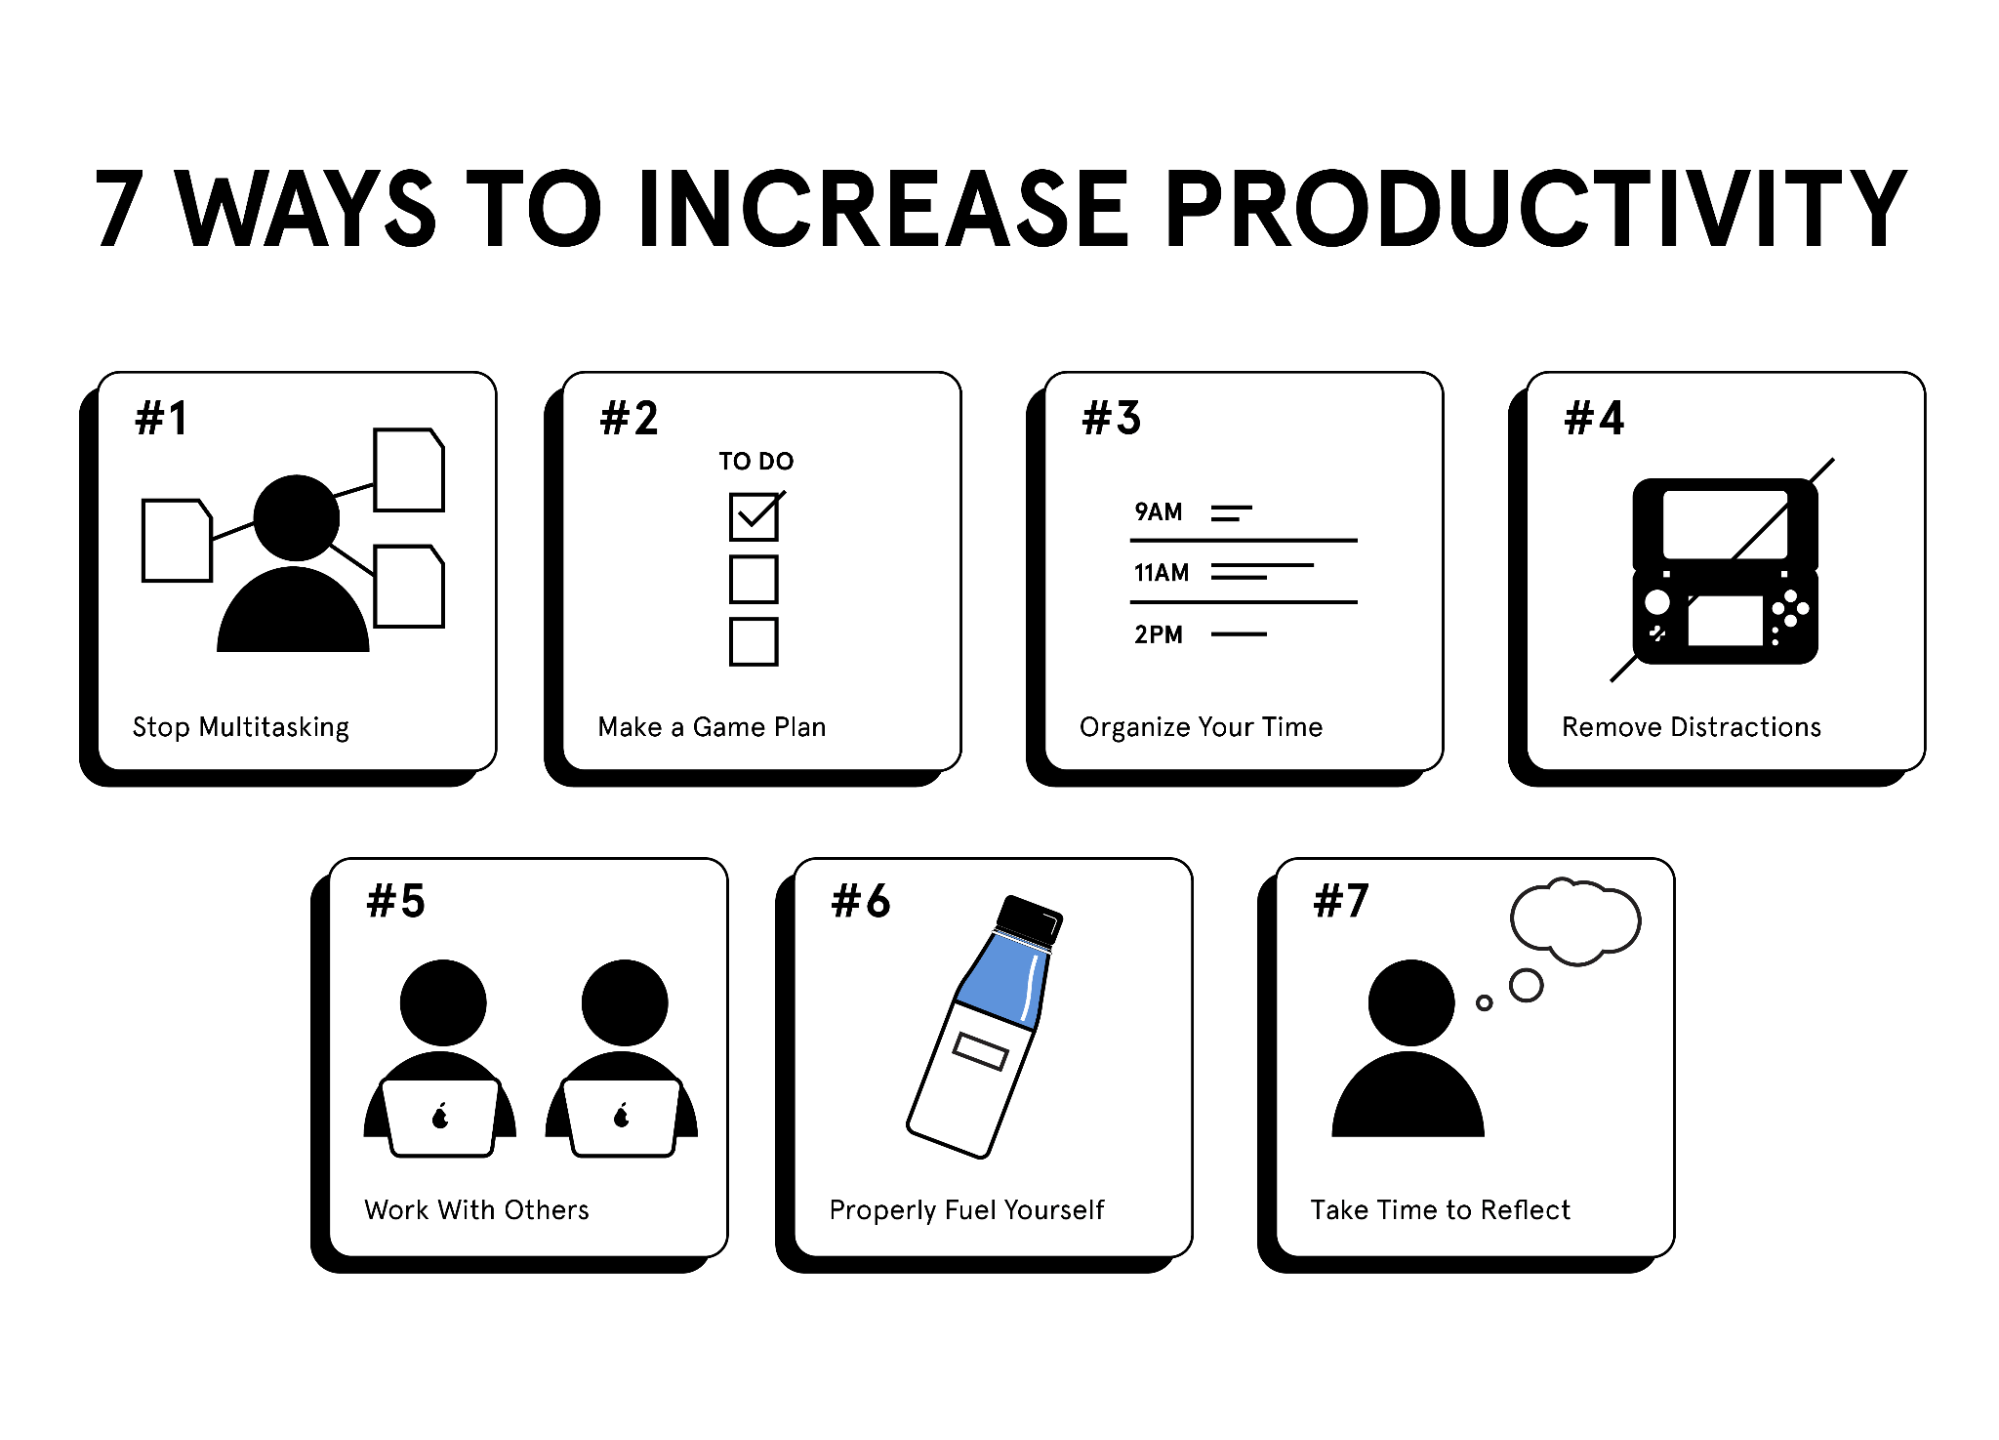 7 ways to increase productivity by Soylent